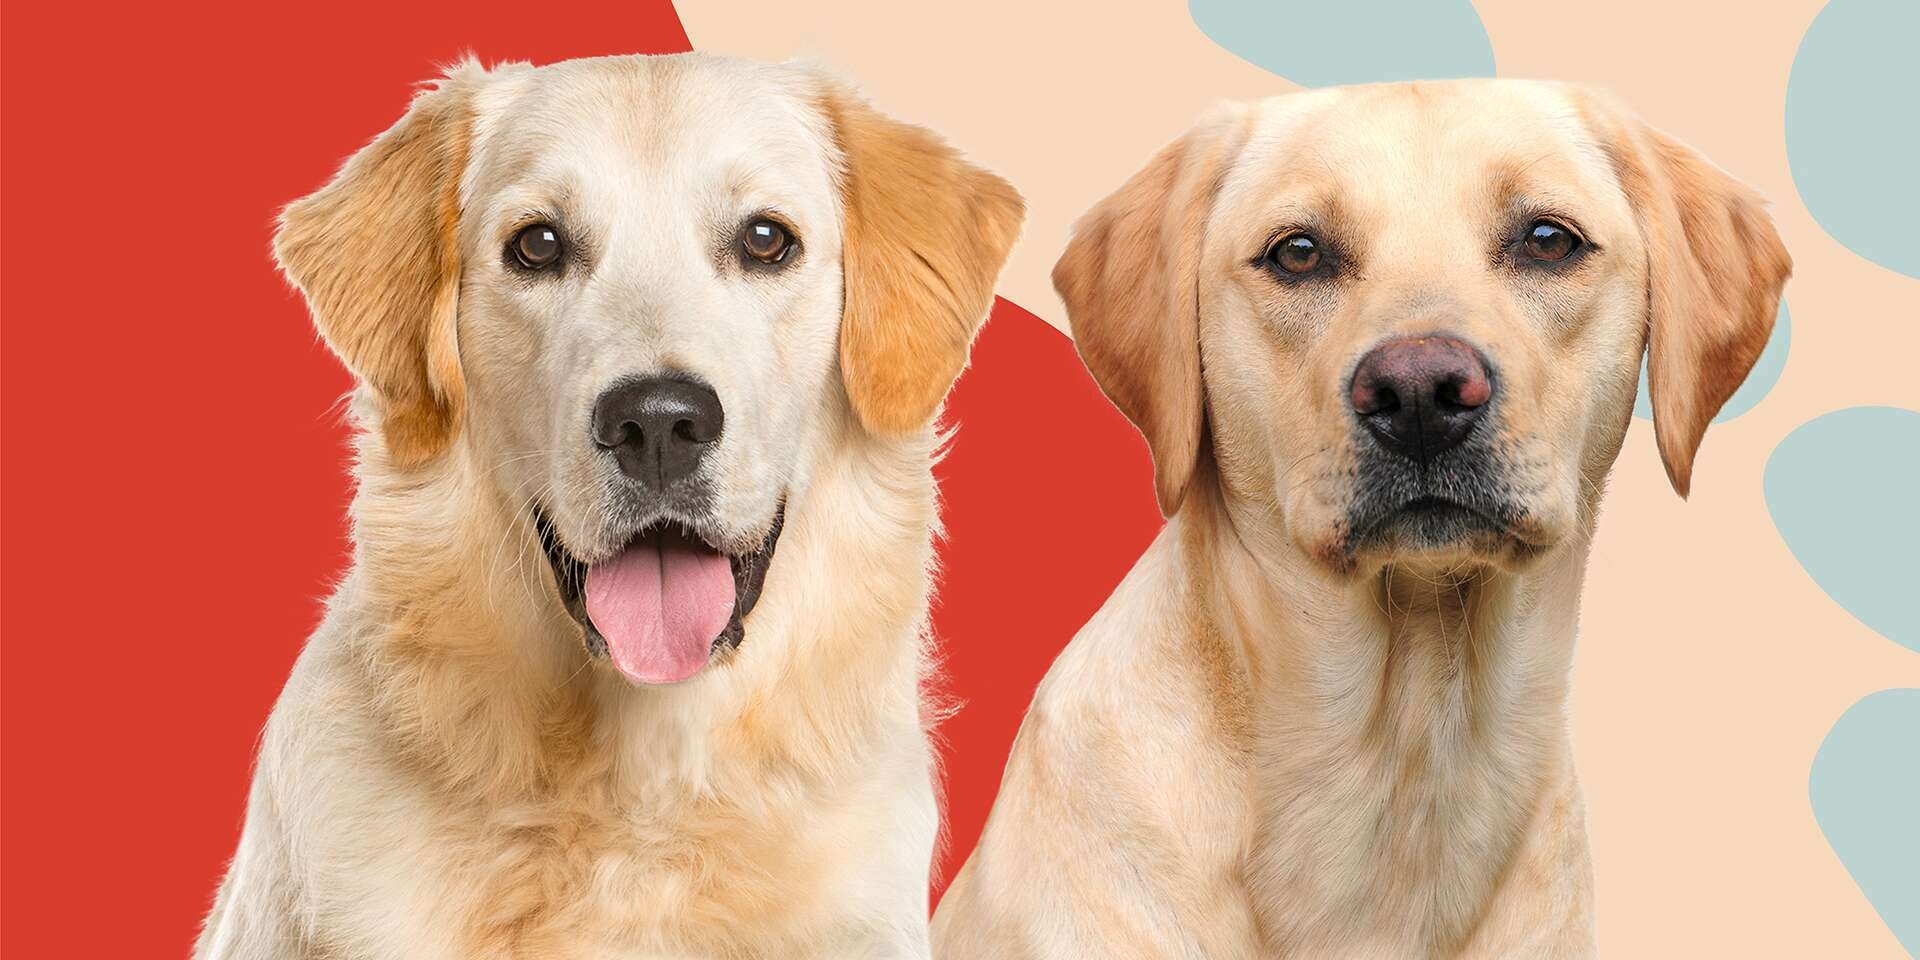 Good-Natured Golden Retriever or Lovable Labrador Retriever: Which Is the Best Fit for You?